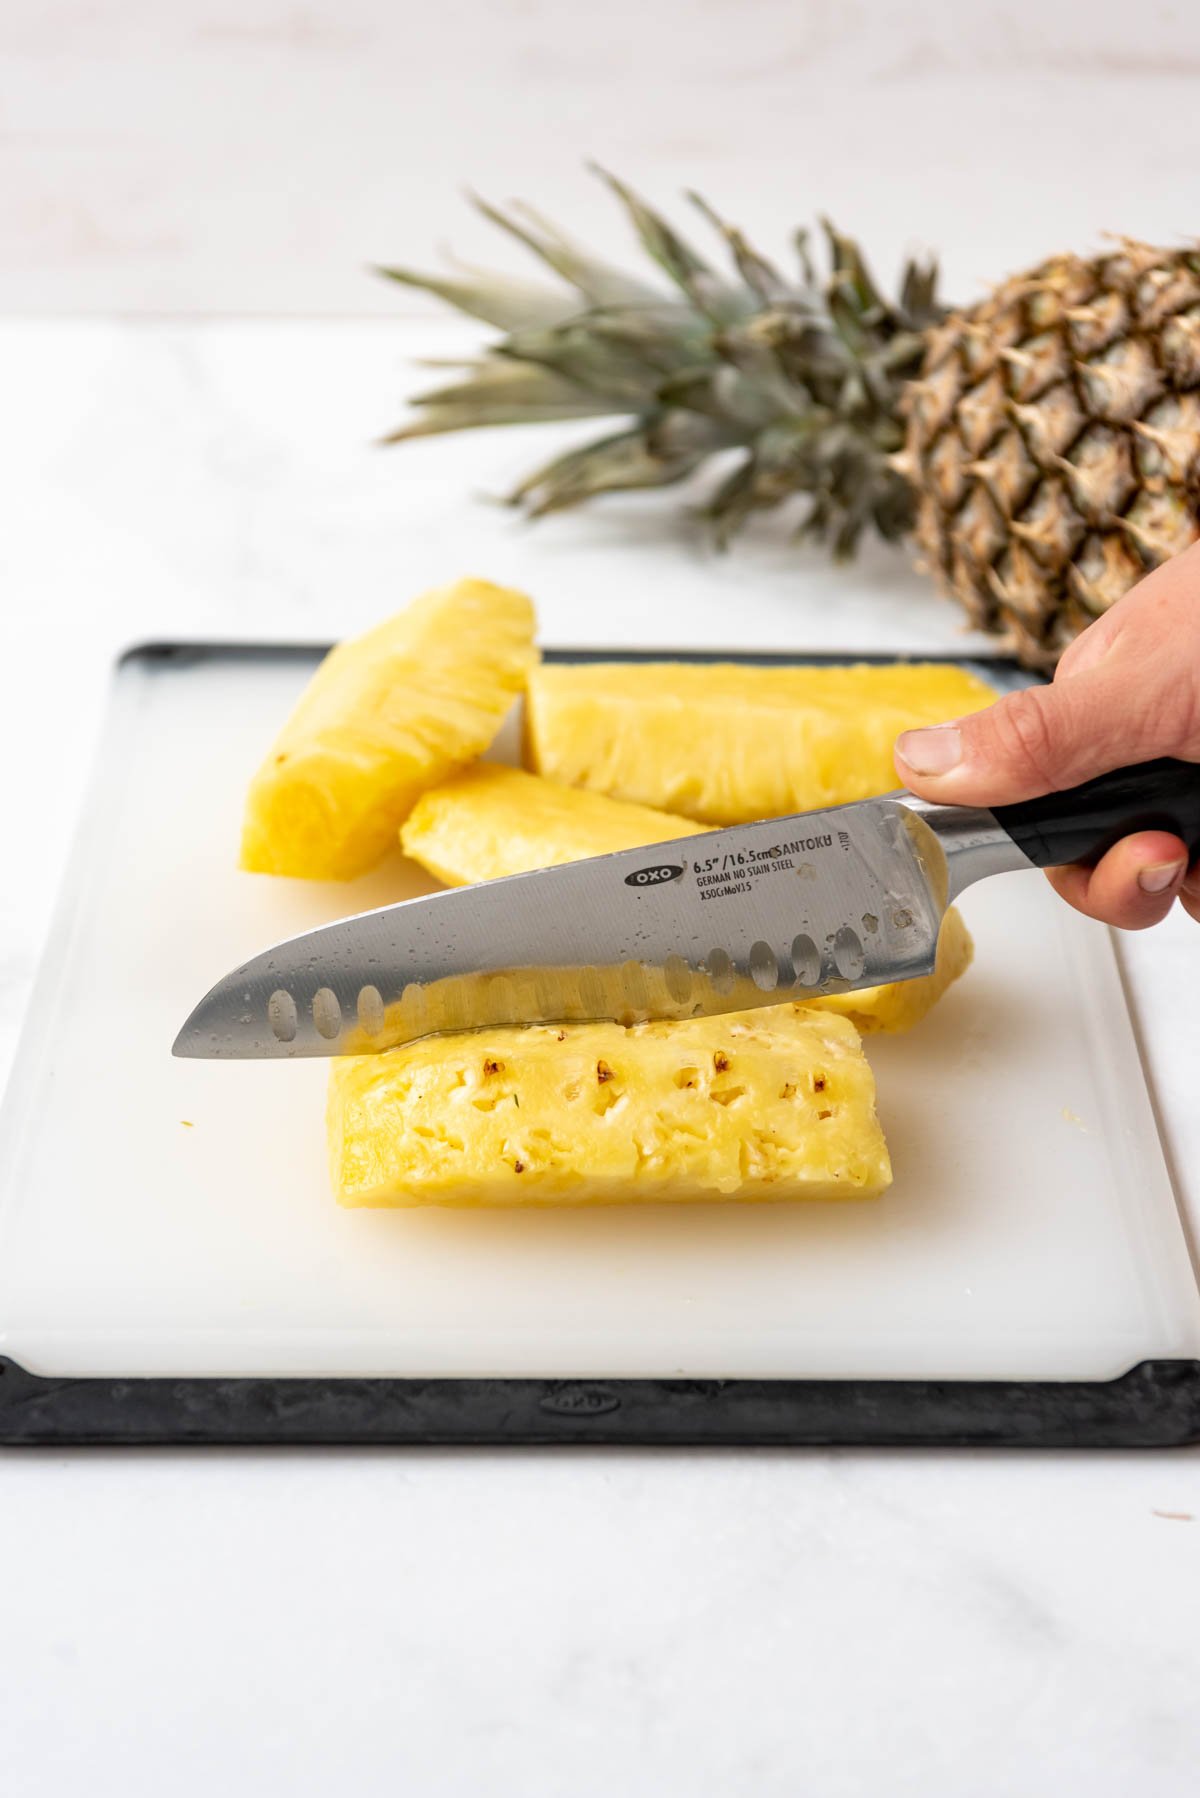 A knife being used to cut pineapple into spears.